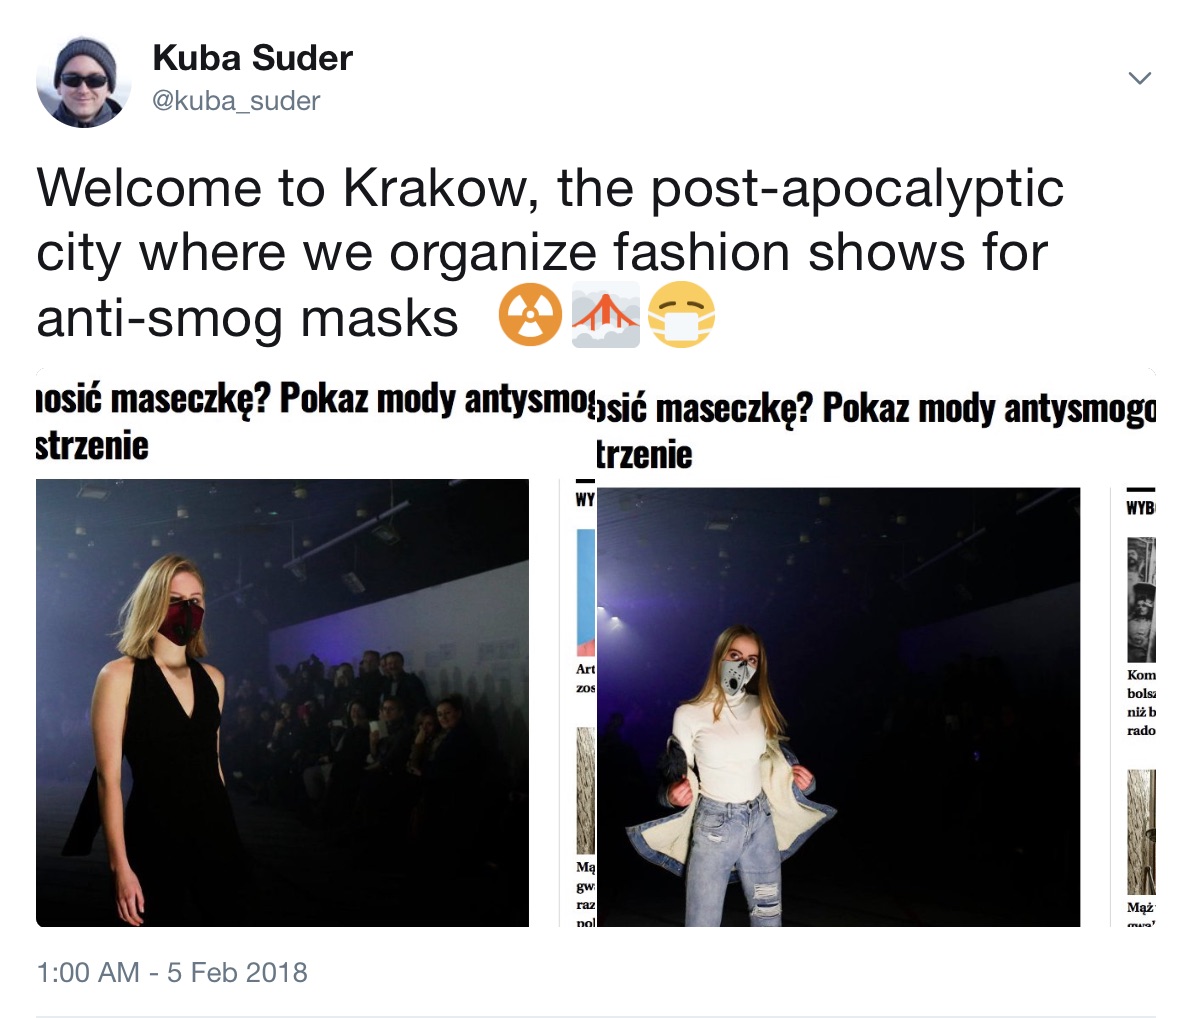 Welcome to Krakow, the post-apocalyptic city where we organize fashion shows for anti-smog masks